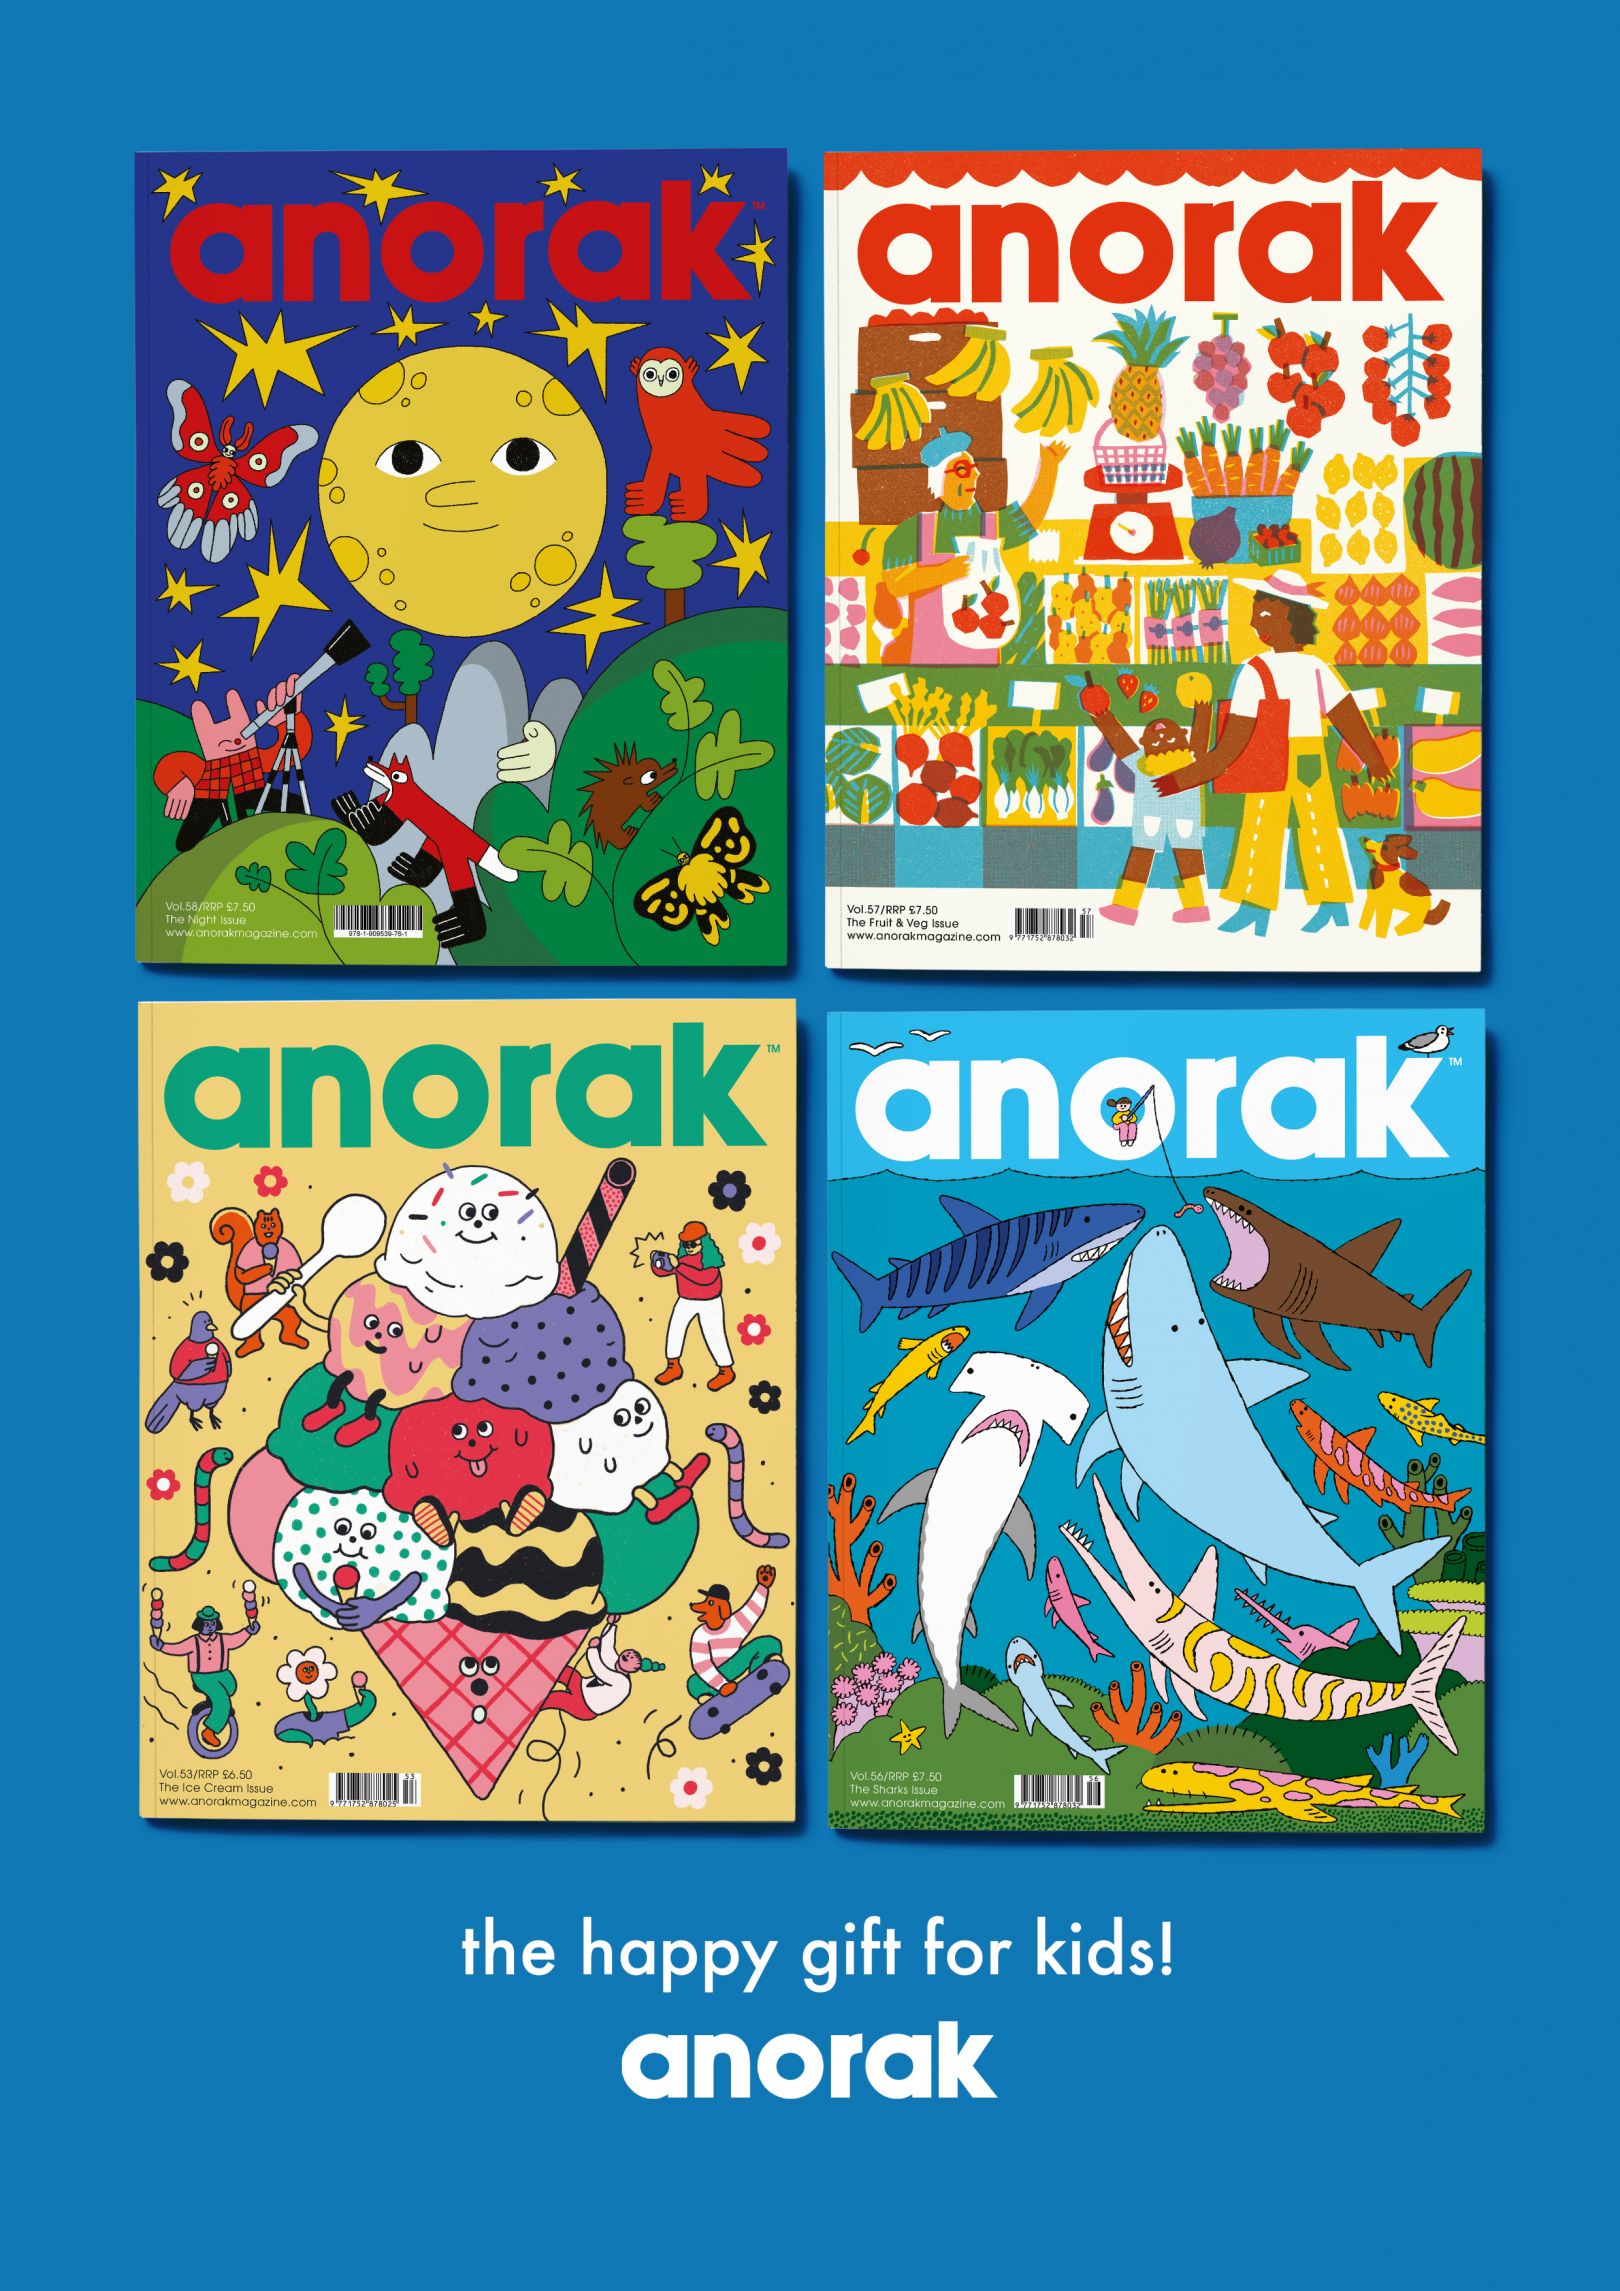 Anorak turns 15: Founder Cathy Olmedillas tells the story so far of the ...